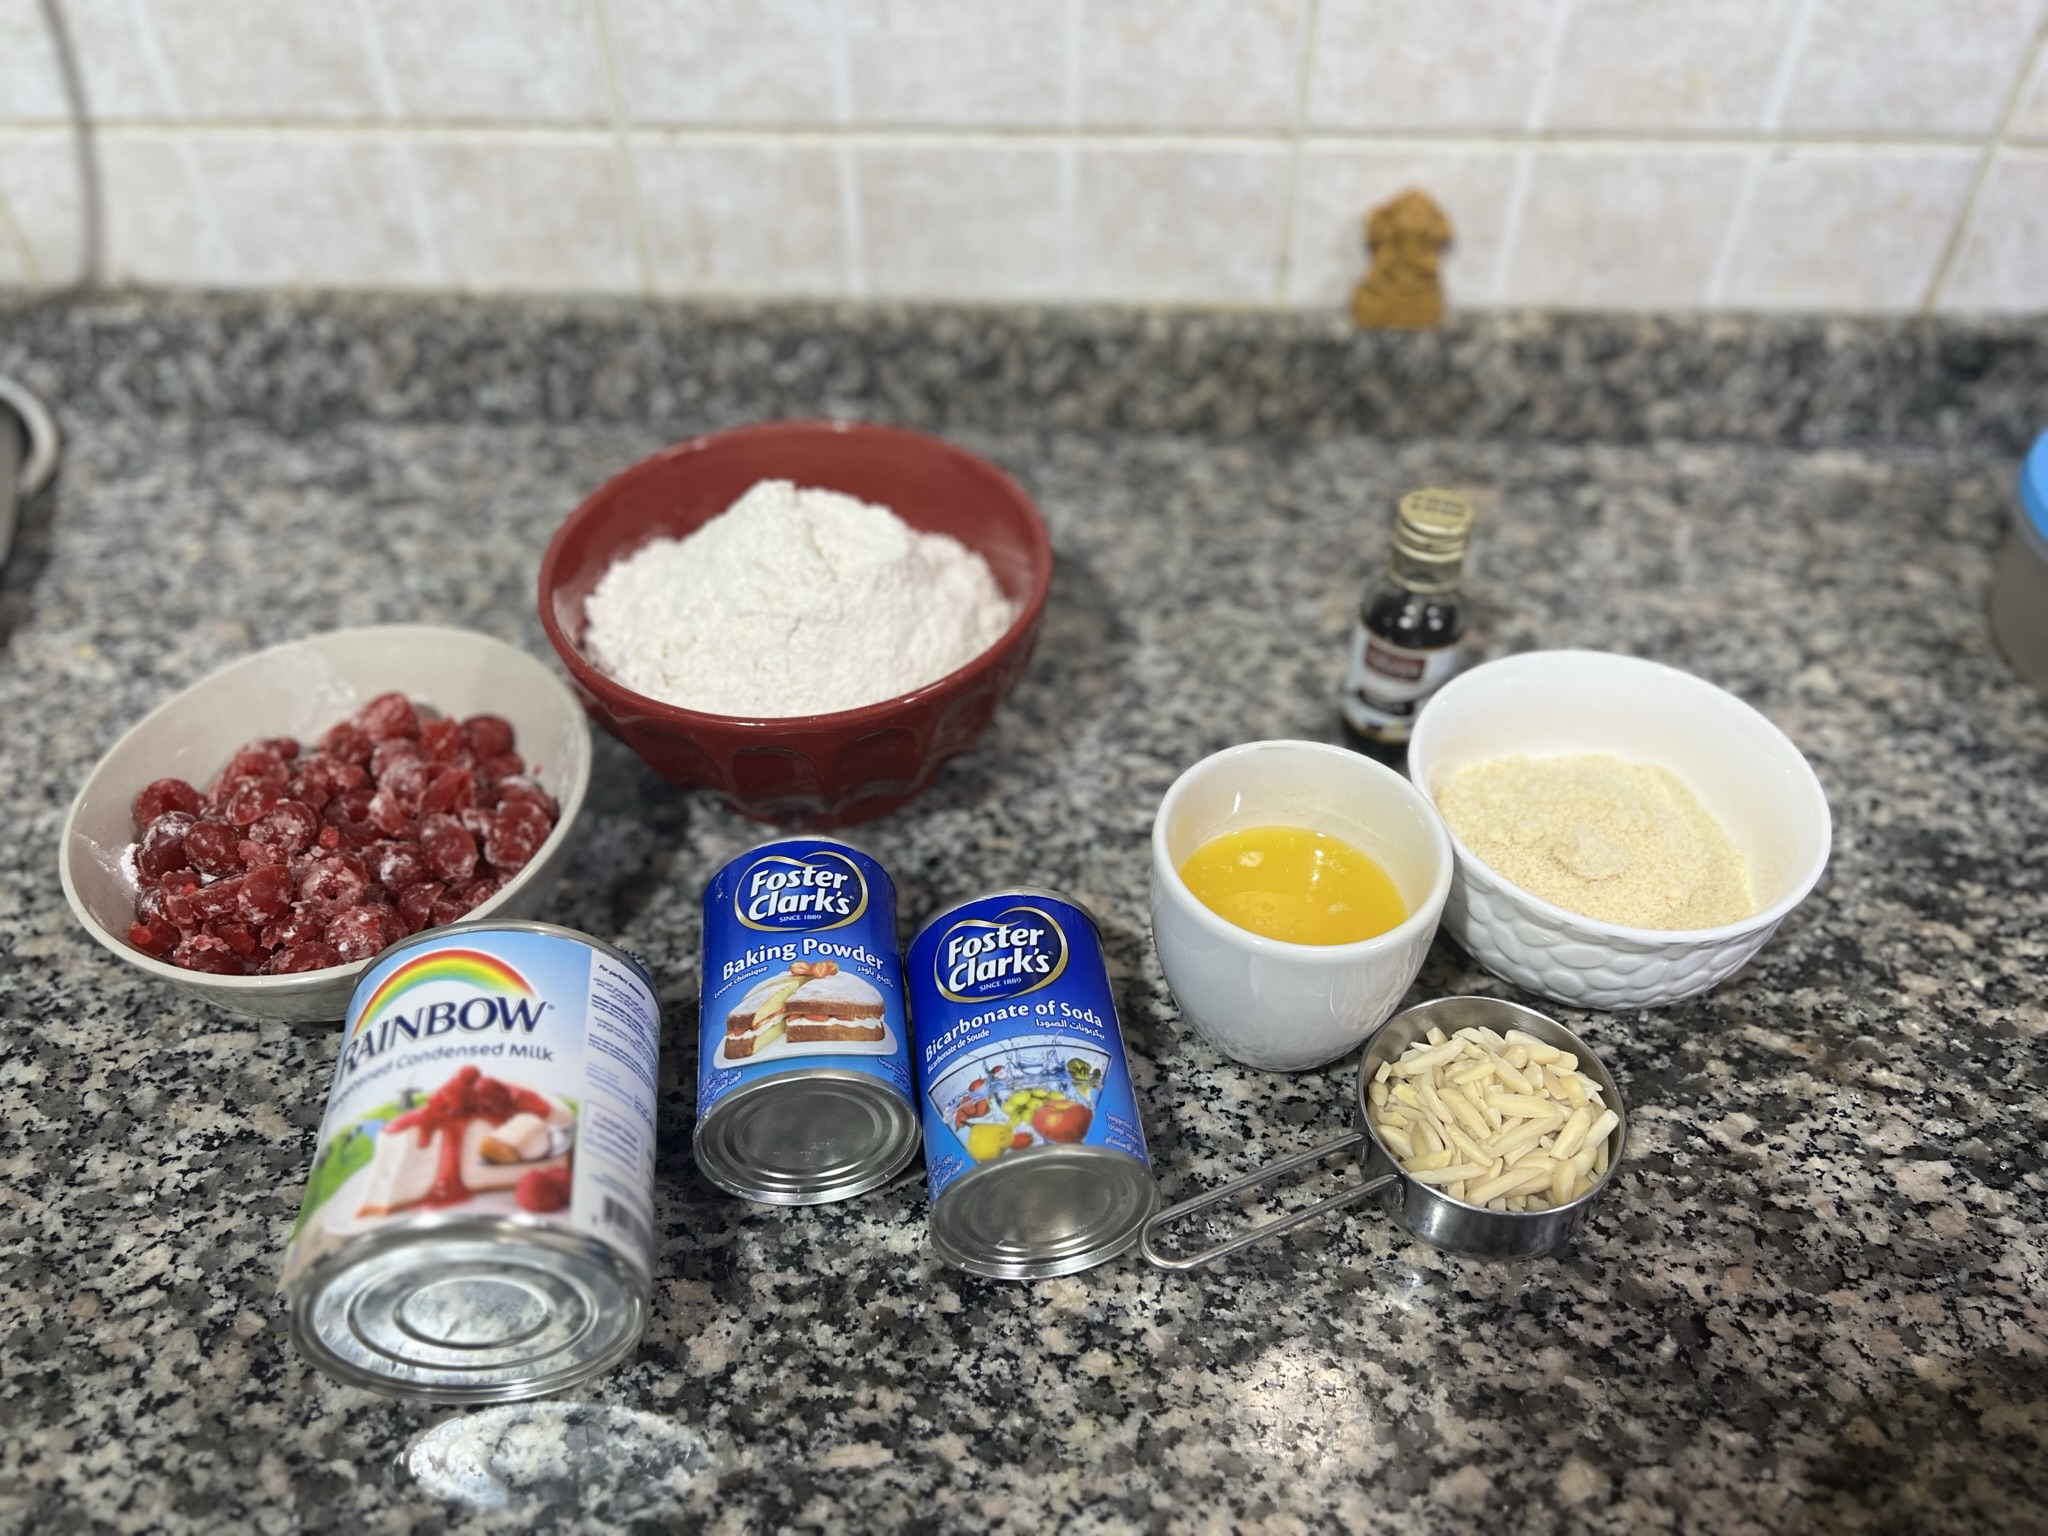 Ingredients for cherry almond cake